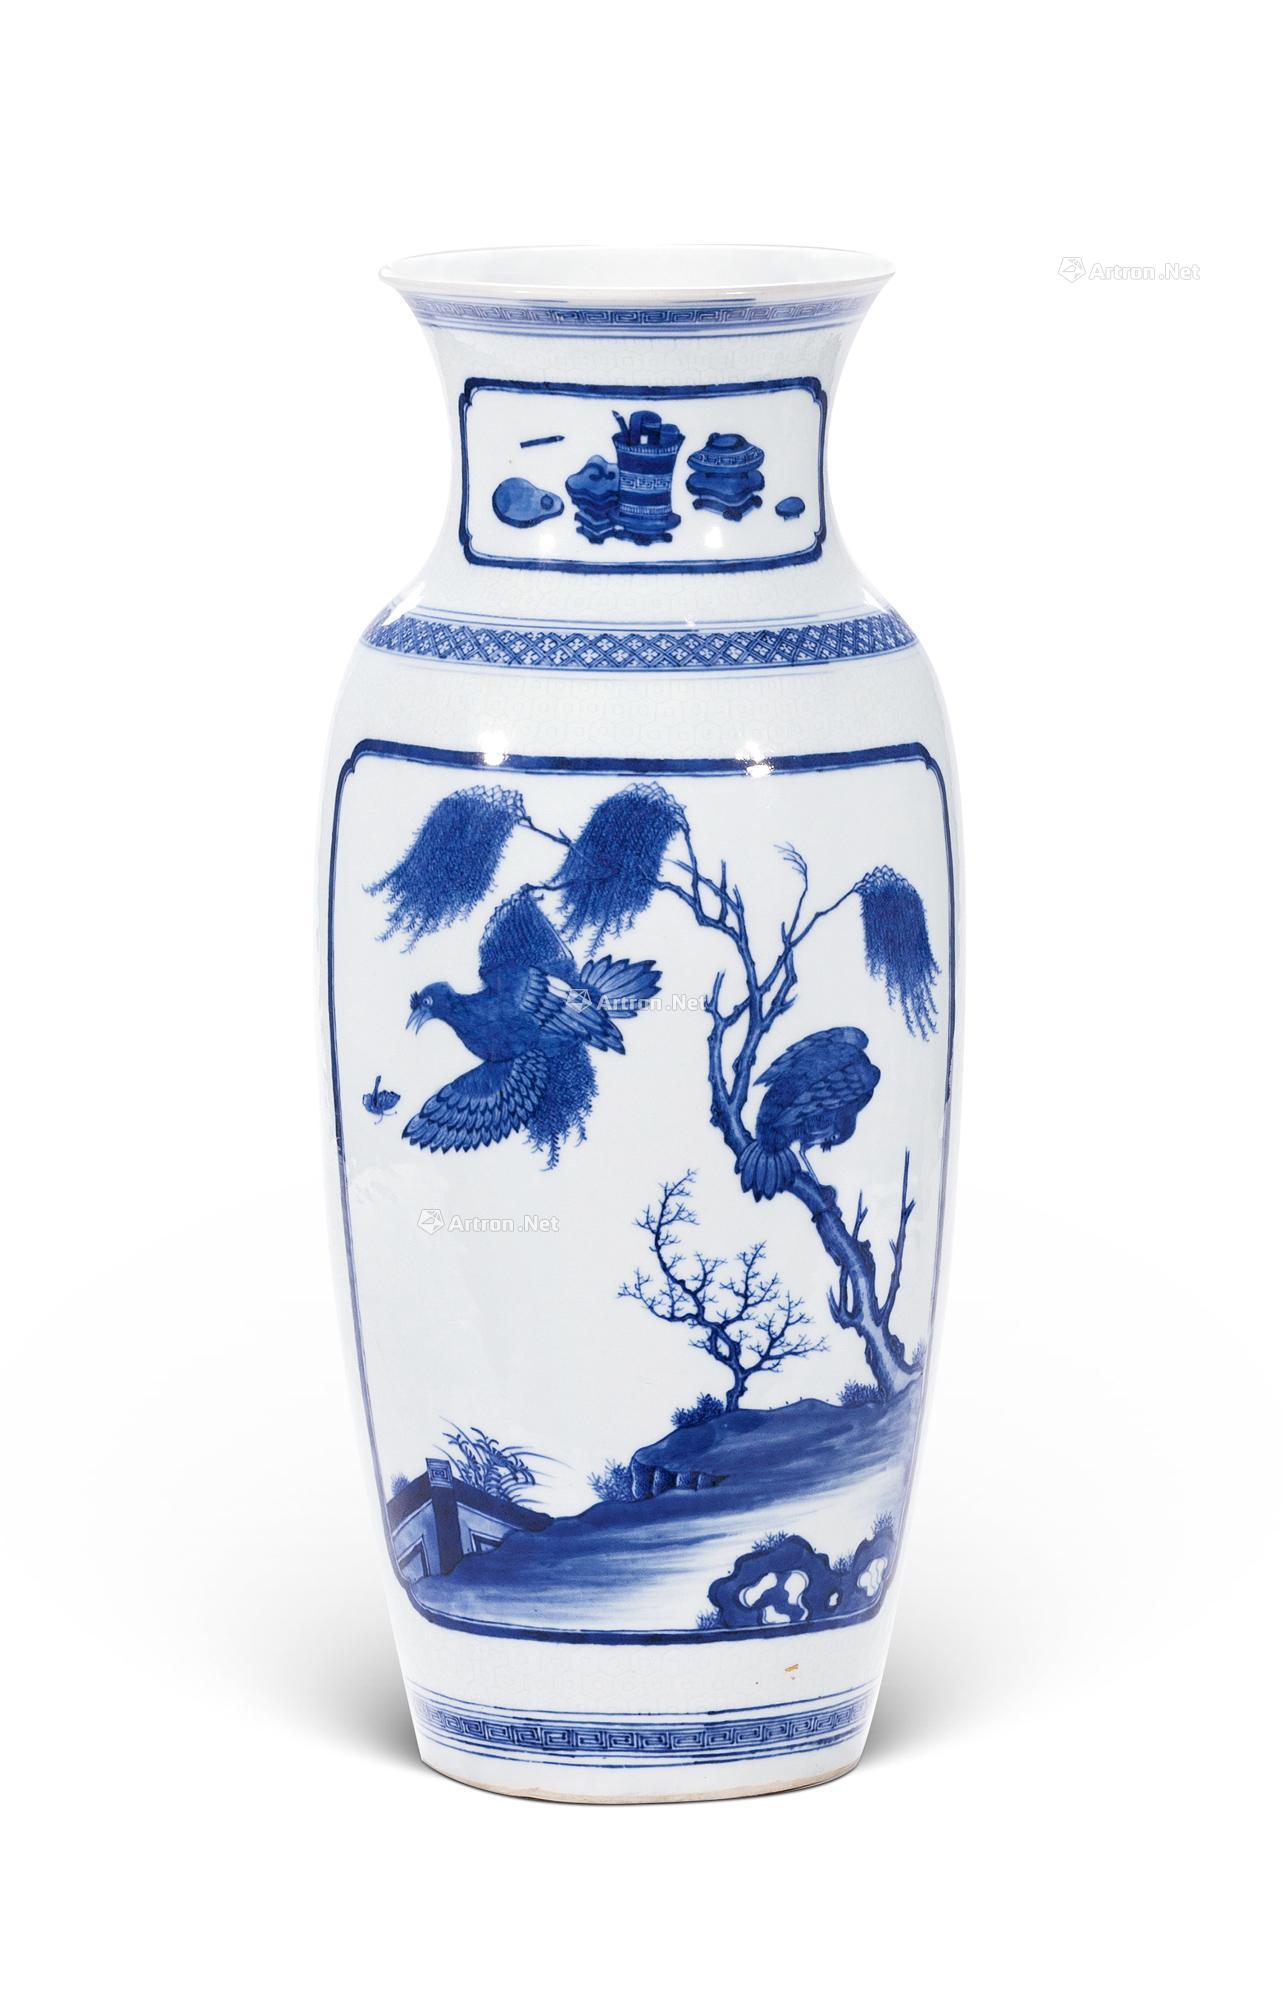 Qing qianlong in blue and white brocade medallion benevolent figure bottles of flowers and birds